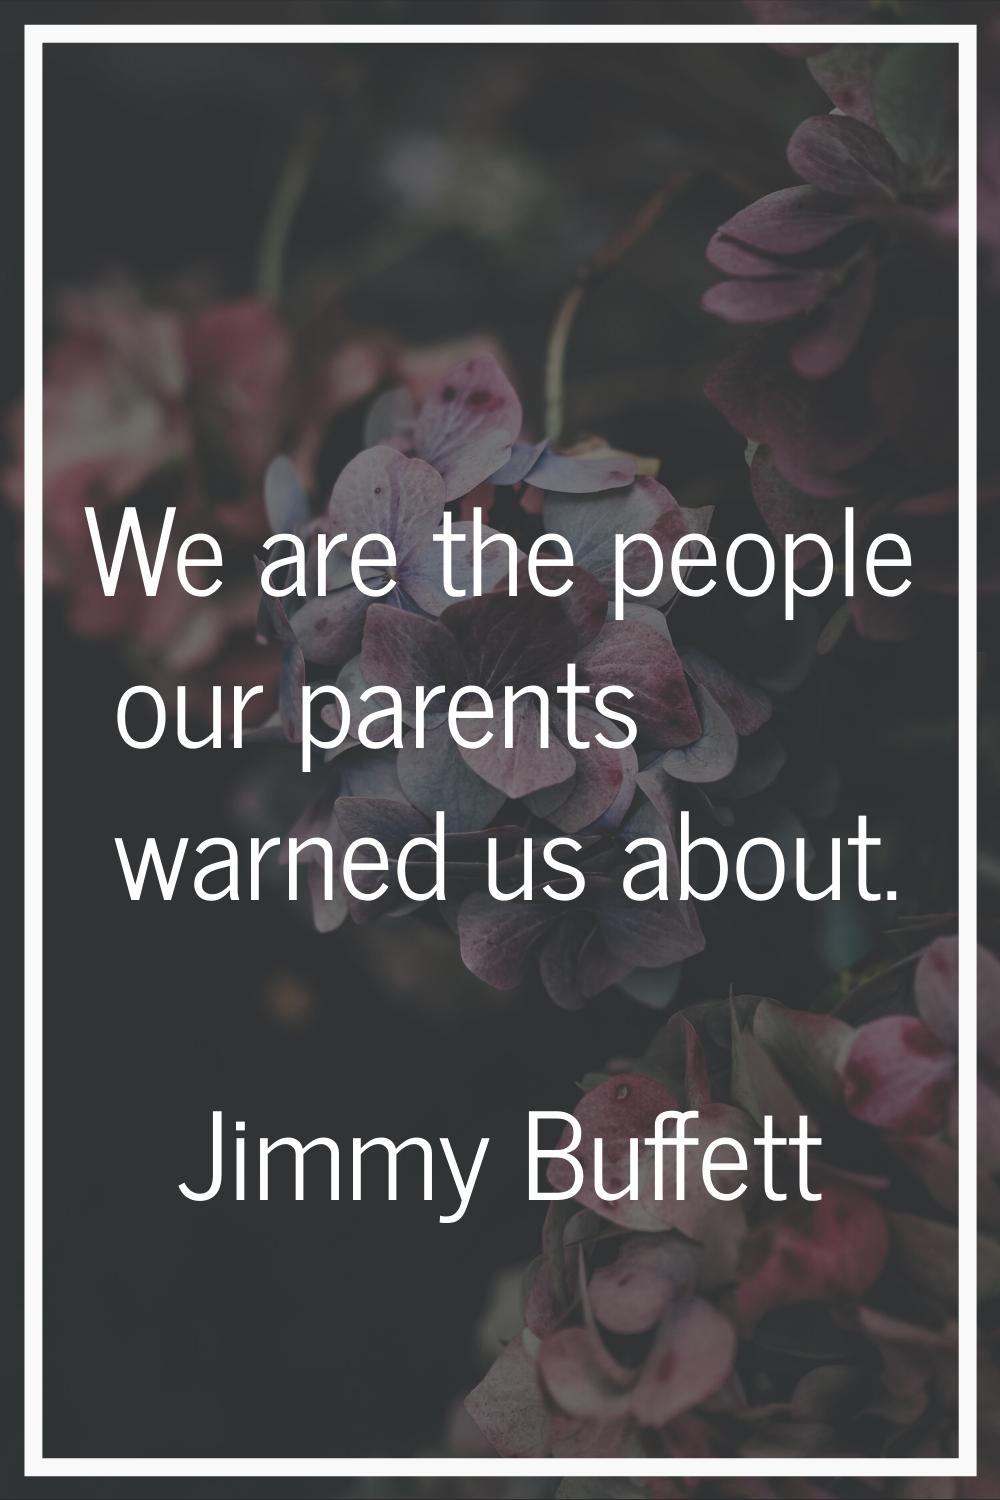 We are the people our parents warned us about.